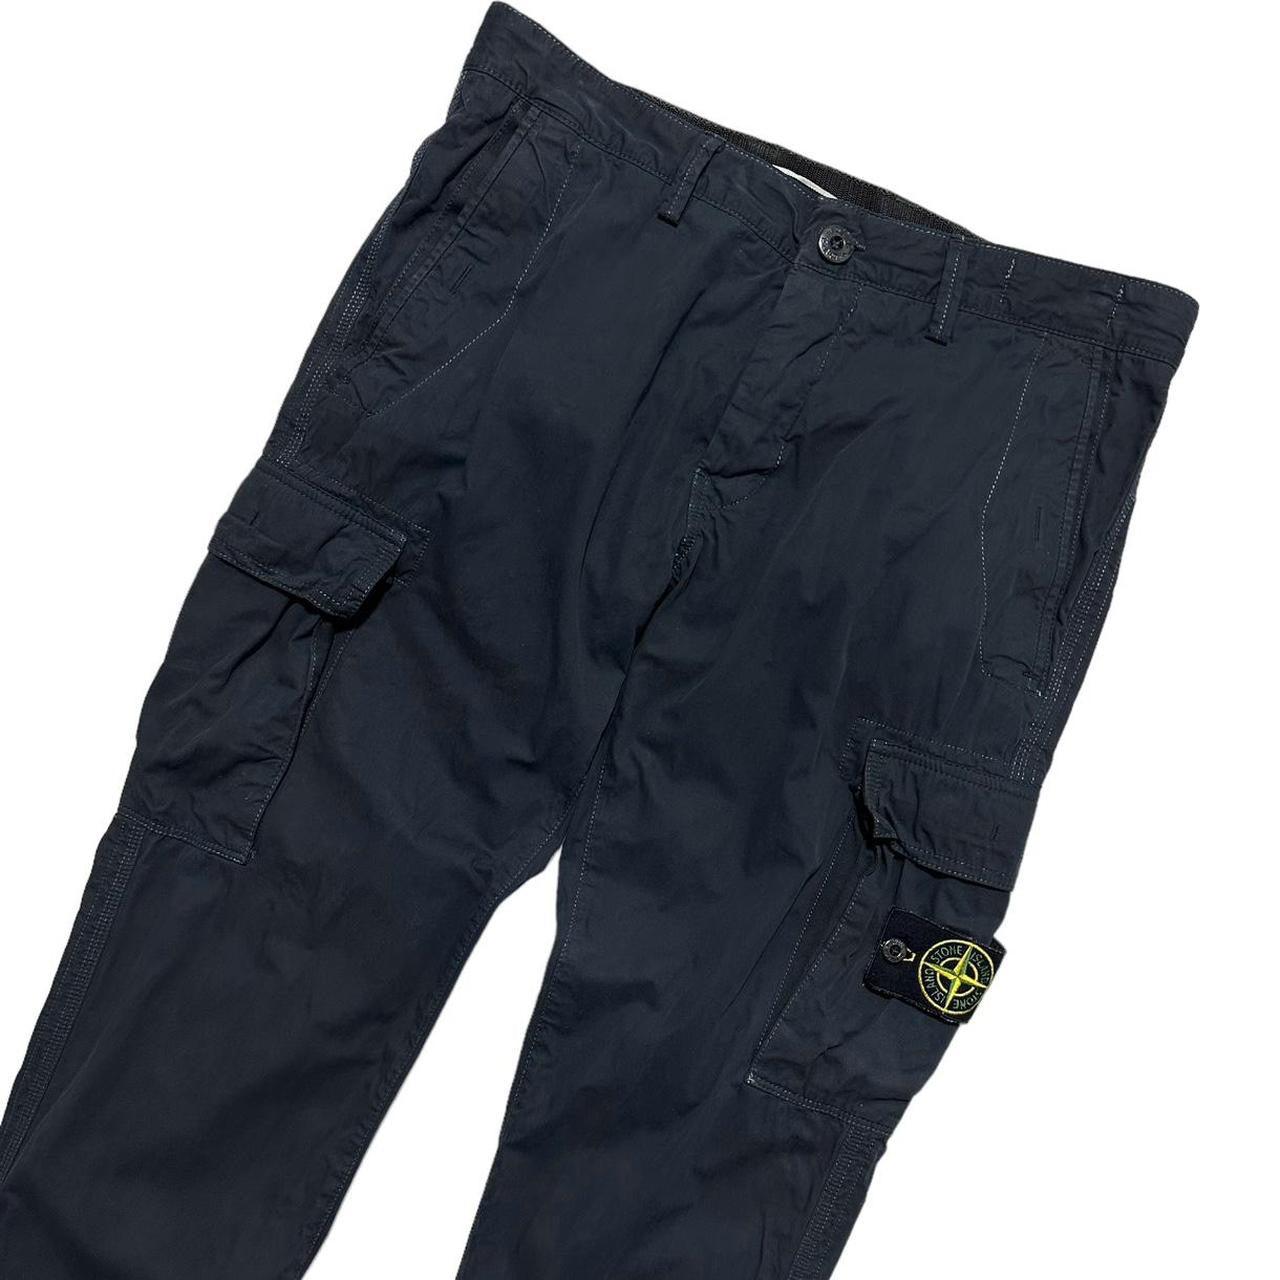 Stone Island Navy Dyed Canavs Cargos - Known Source